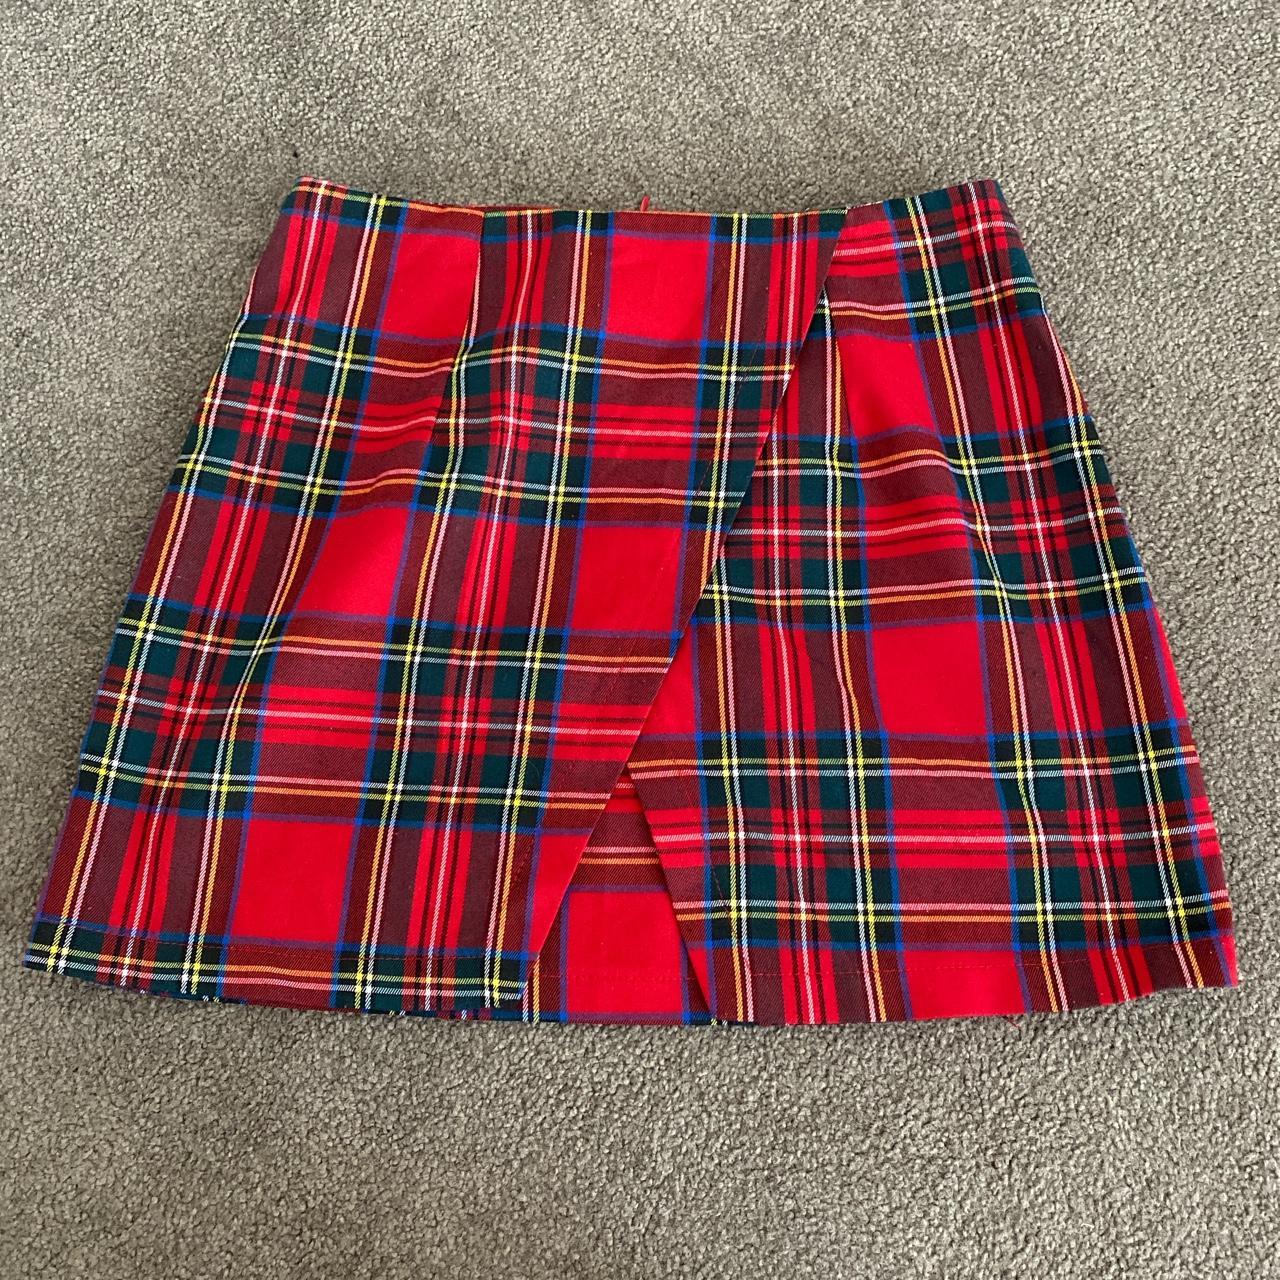 Cute red plaid skirt. Size 10 but will fit an 8 - Depop